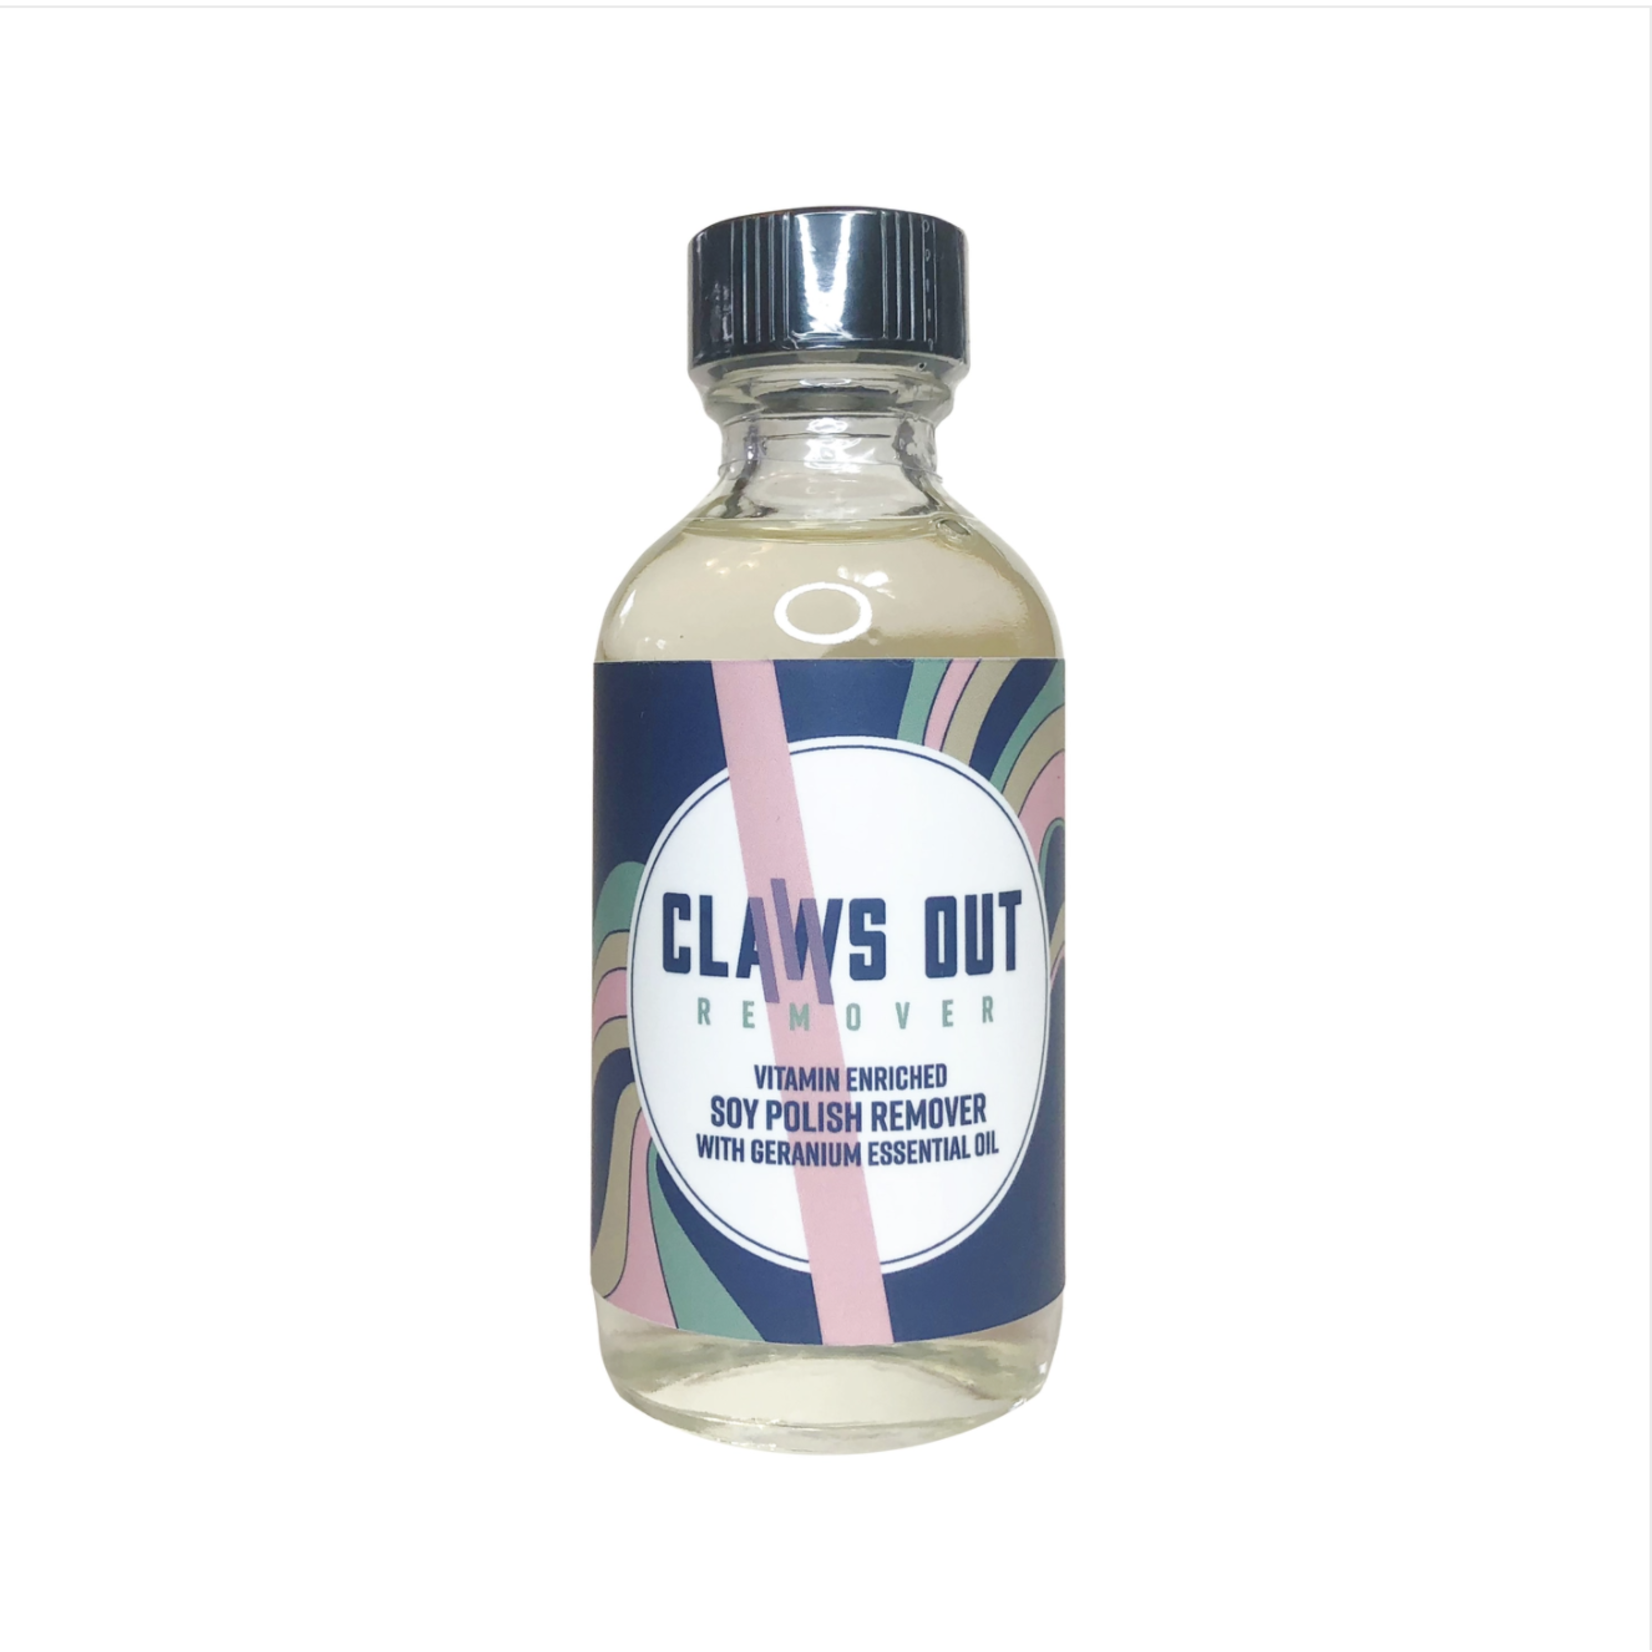 Claws Out Vitamin-Enriched Nail Polish Remover